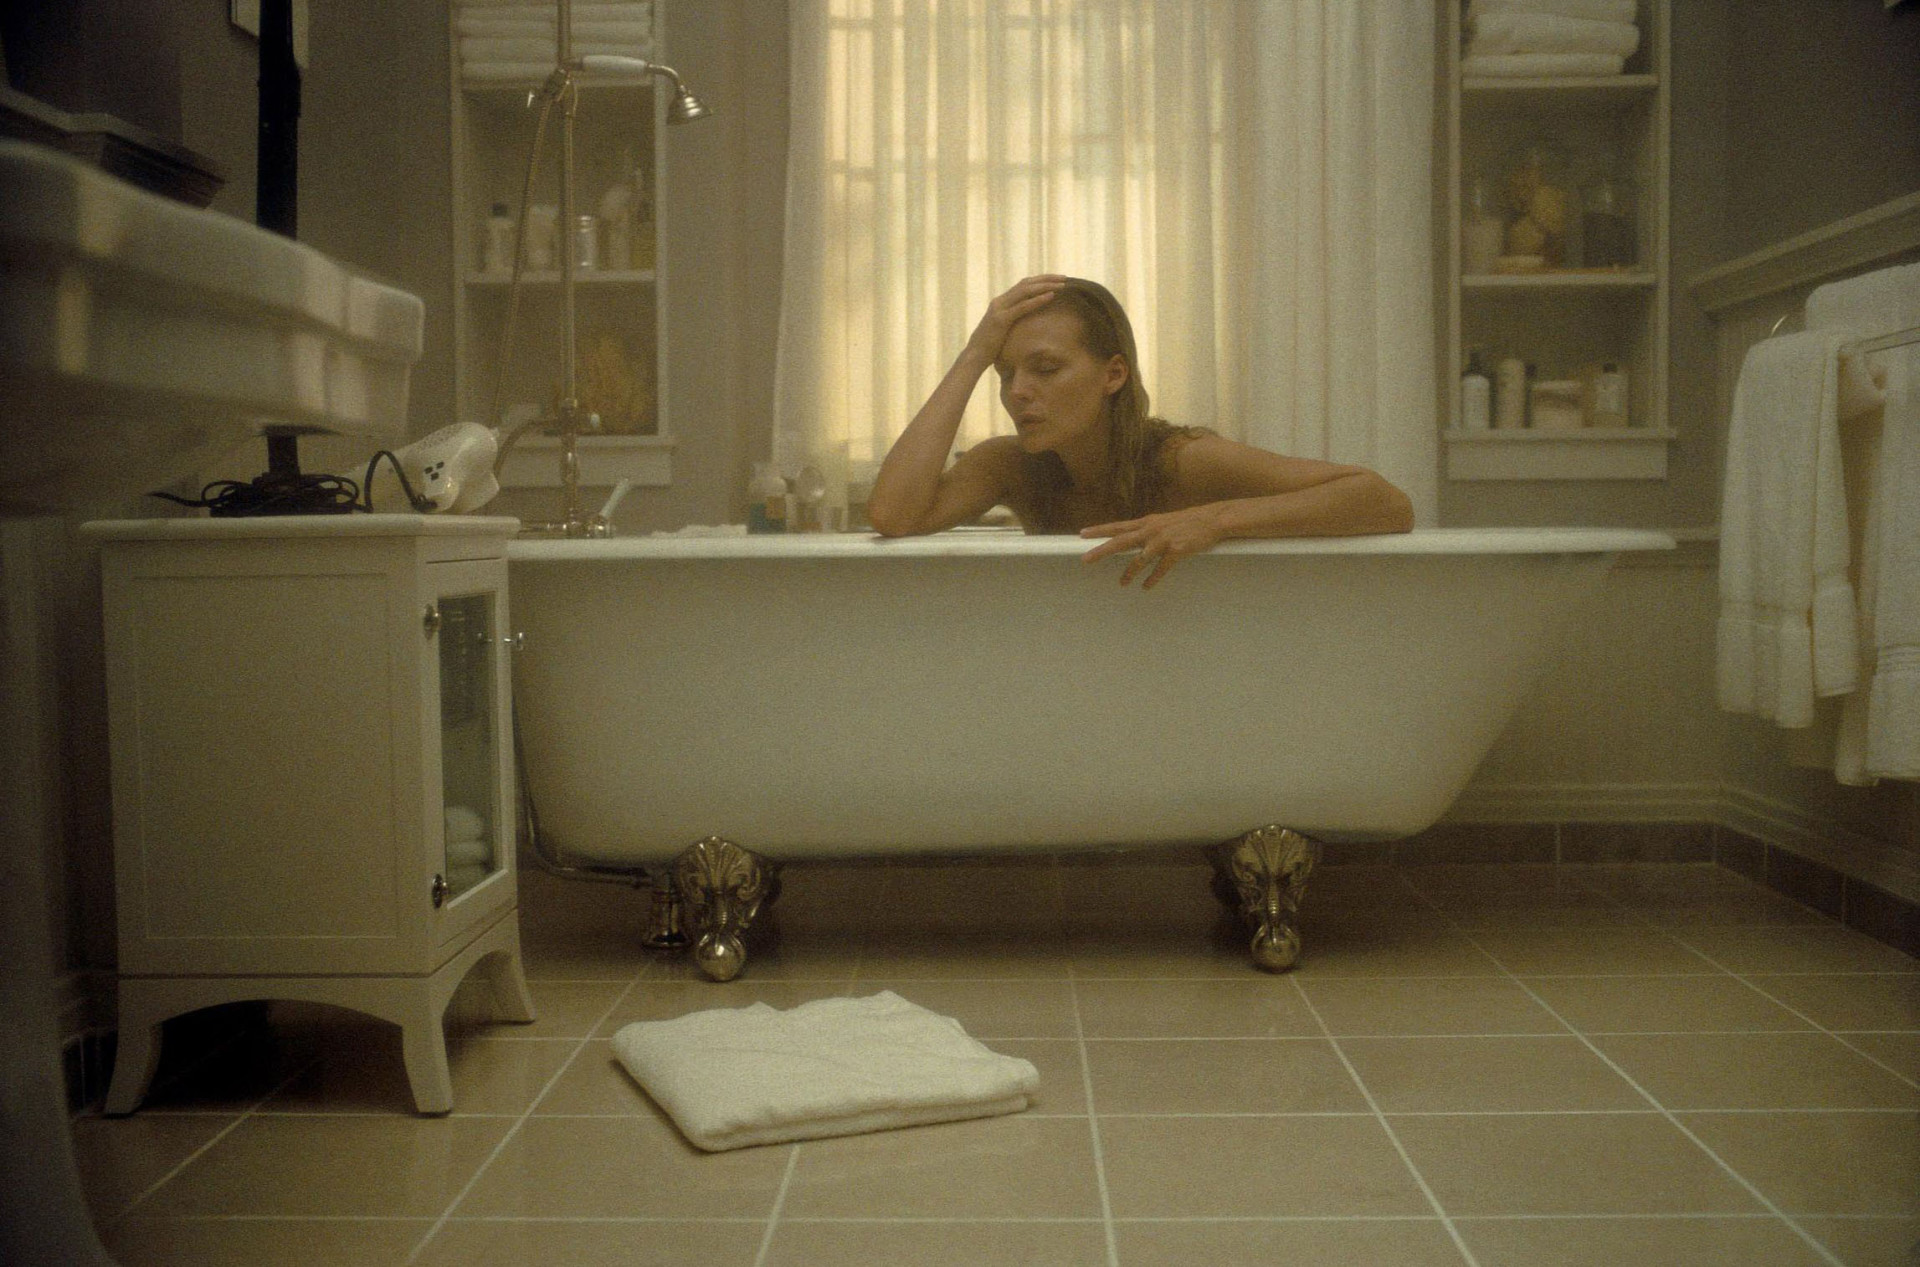 <p>The chilling bathtub sequence in 'What Lies Beneath' sees Michelle Pfeiffer's character Claire survive an attempted drowning. But who's responsible for staging her supposed suicide?</p><p><a href="https://www.msn.com/en-us/community/channel/vid-7xx8mnucu55yw63we9va2gwr7uihbxwc68fxqp25x6tg4ftibpra?cvid=94631541bc0f4f89bfd59158d696ad7e">Follow us and access great exclusive content every day</a></p>